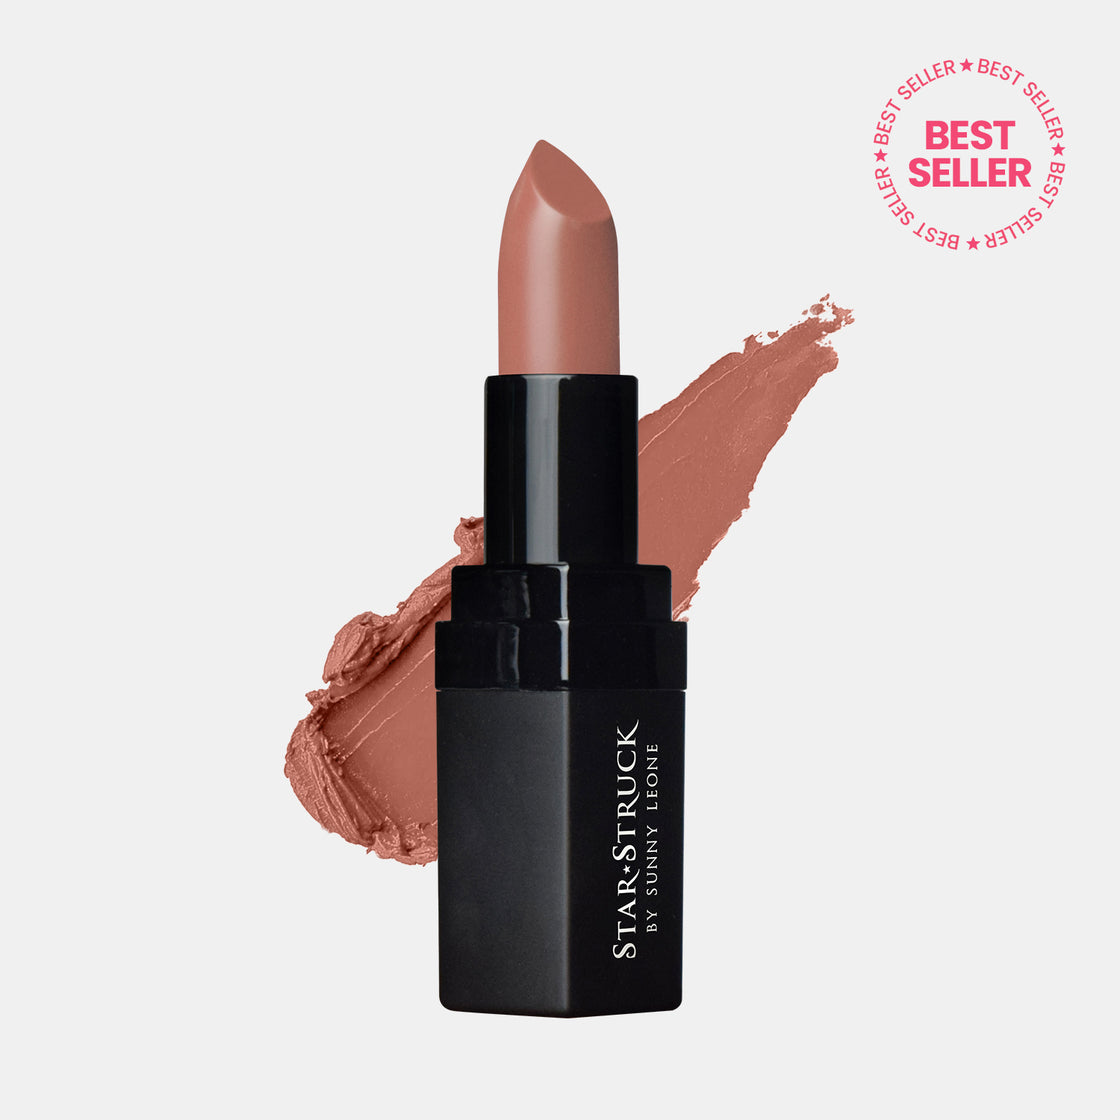 Toffee - Luxe Matte Lipstick, Nude | 4.2gms